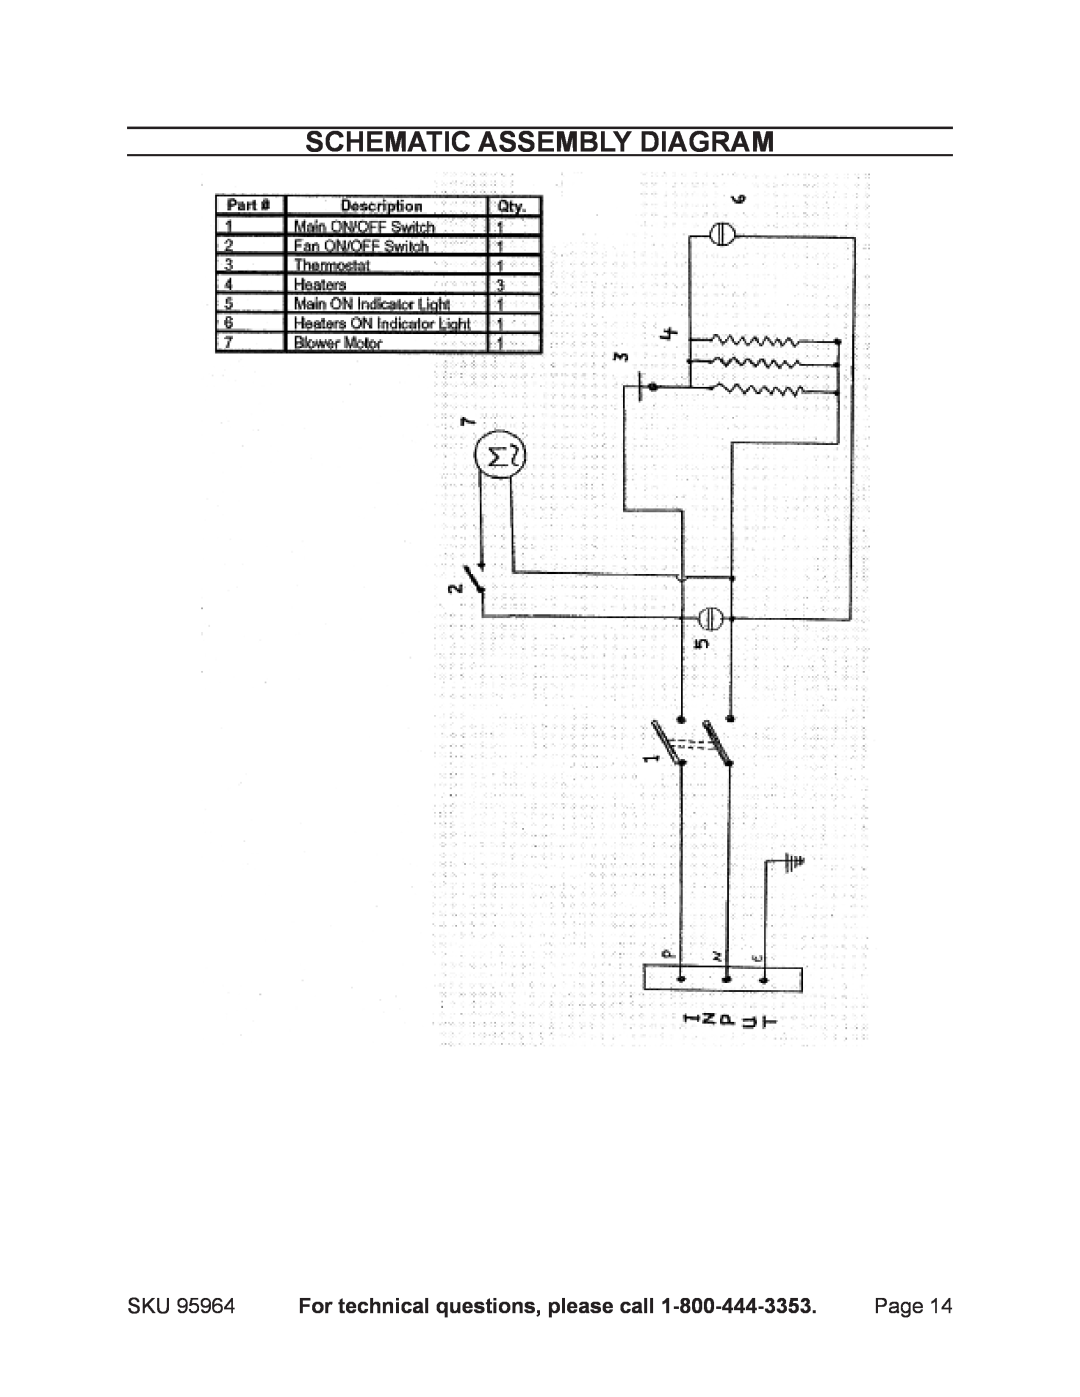 Harbor Freight Tools 95964 operating instructions Schematic assembly diagram, For technical questions, please call 